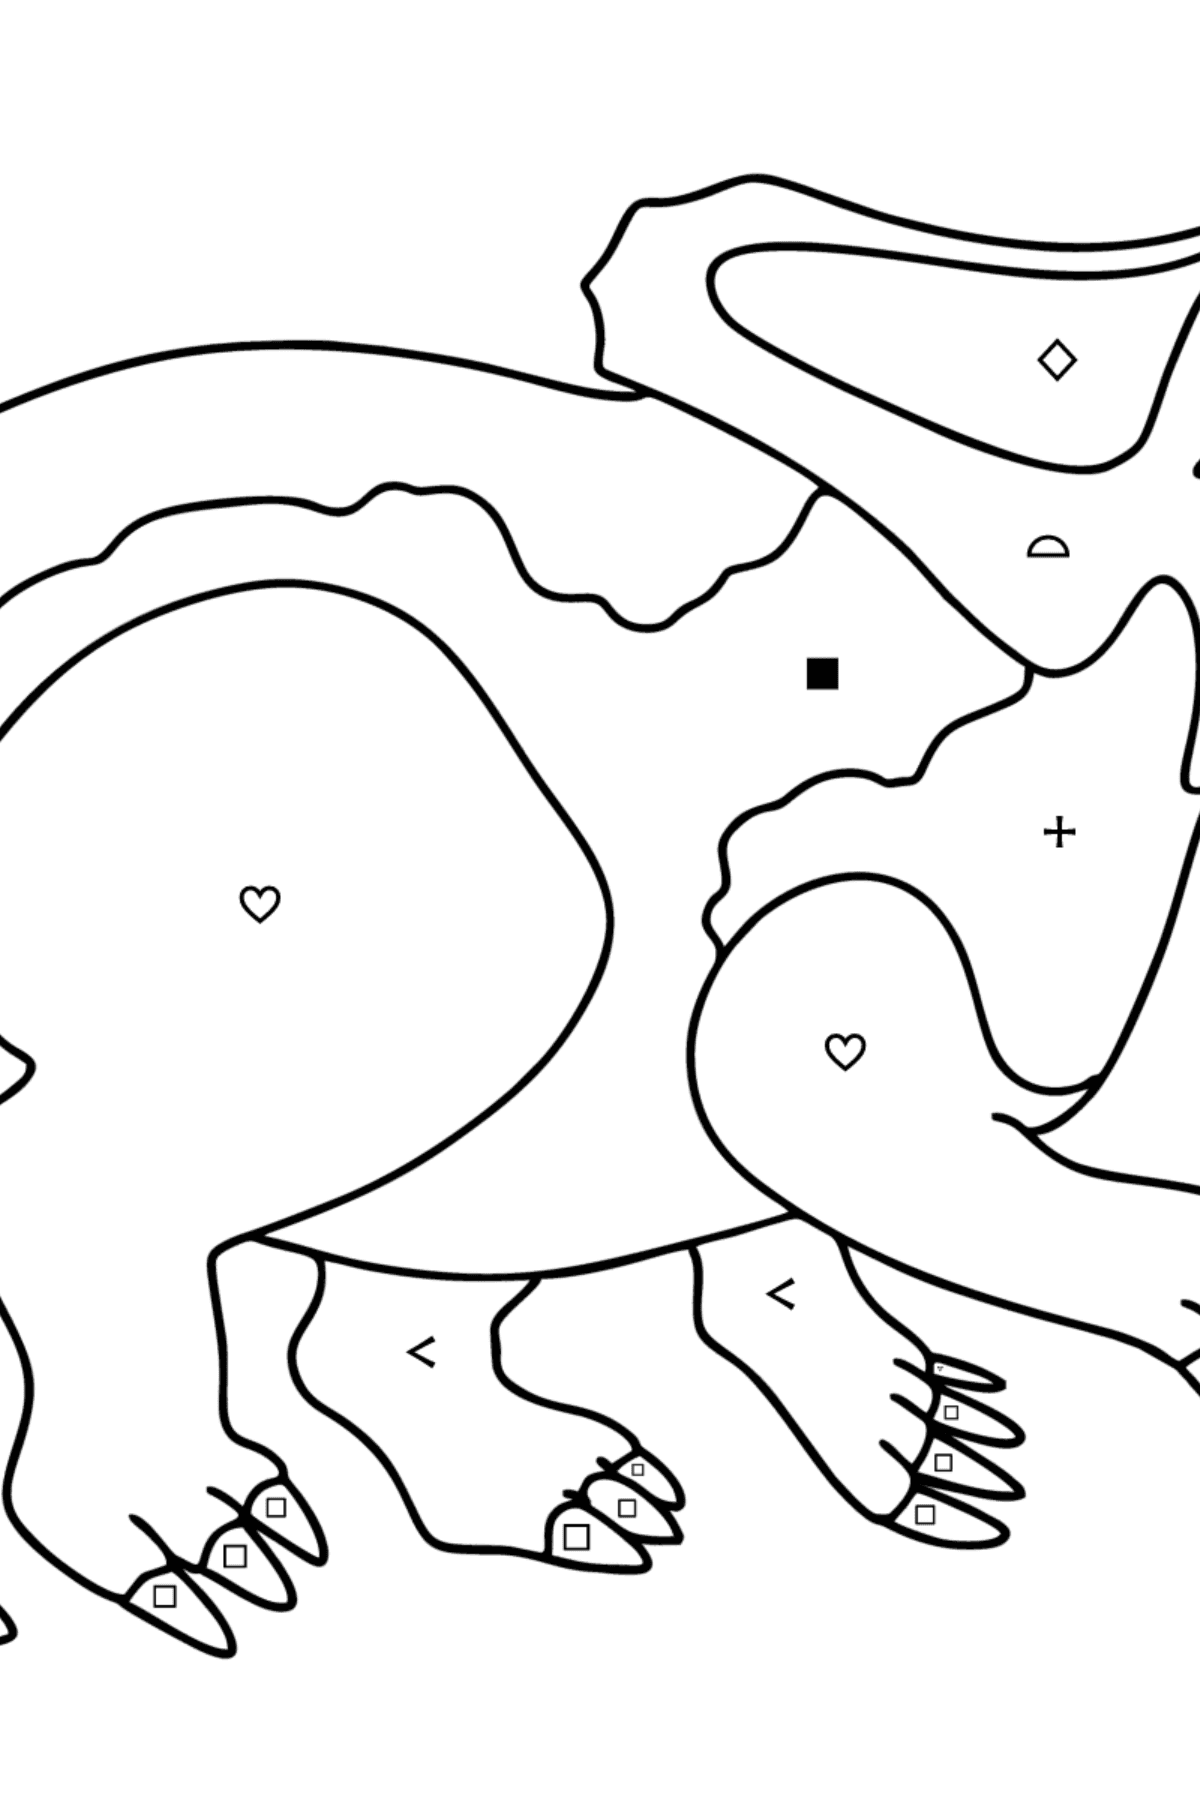 Protoceratops coloring page - Coloring by Symbols and Geometric Shapes for Kids